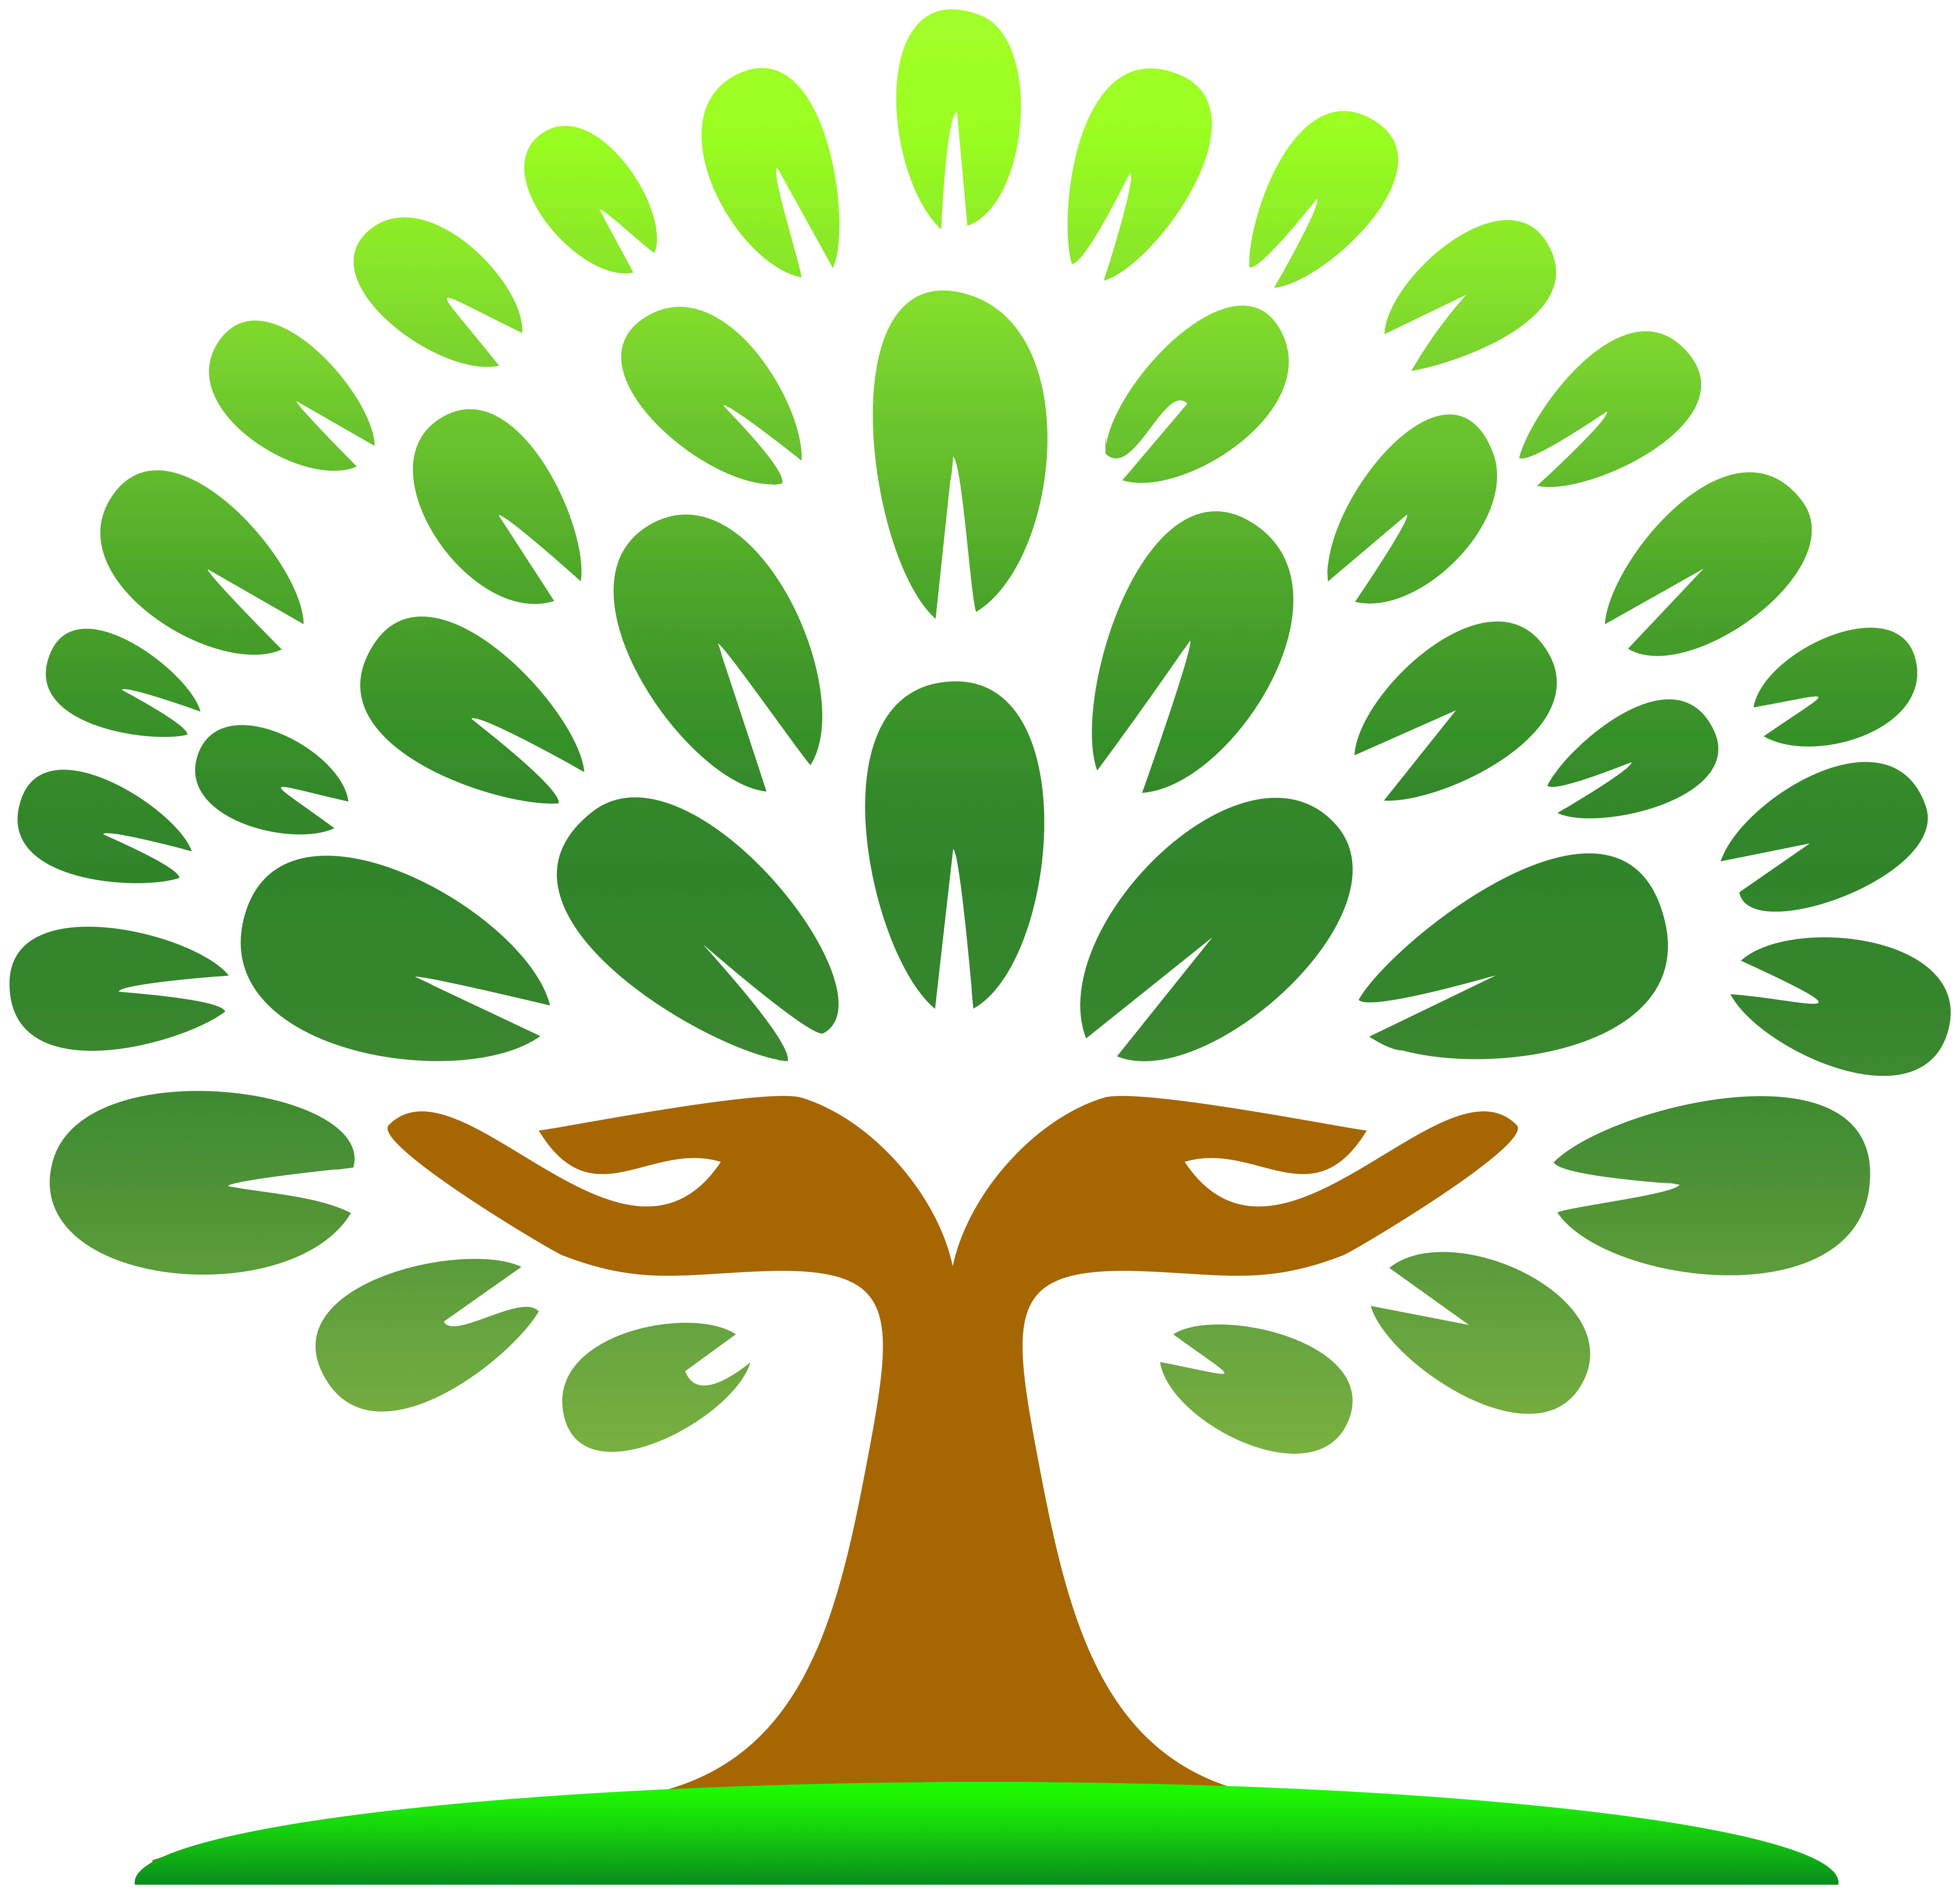 Hands Tree PNG Clipart.